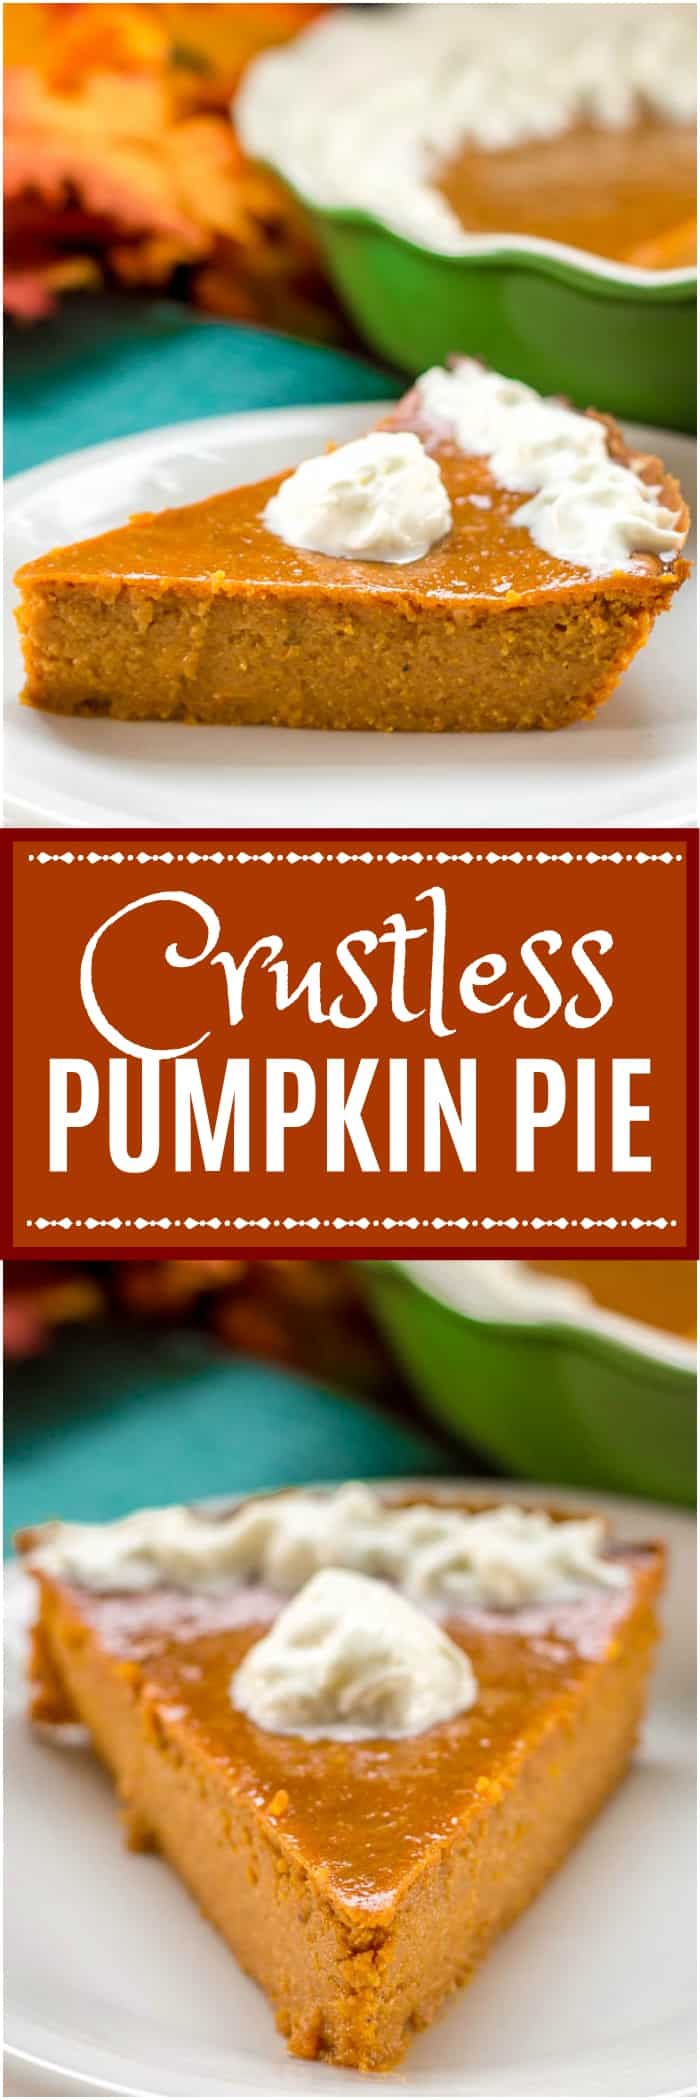 This Crustless Pumpkin Pie keeps only the best part of the pumpkin pie, the pumpkin pie filling, and is so delicious that you won’t miss the crust. 